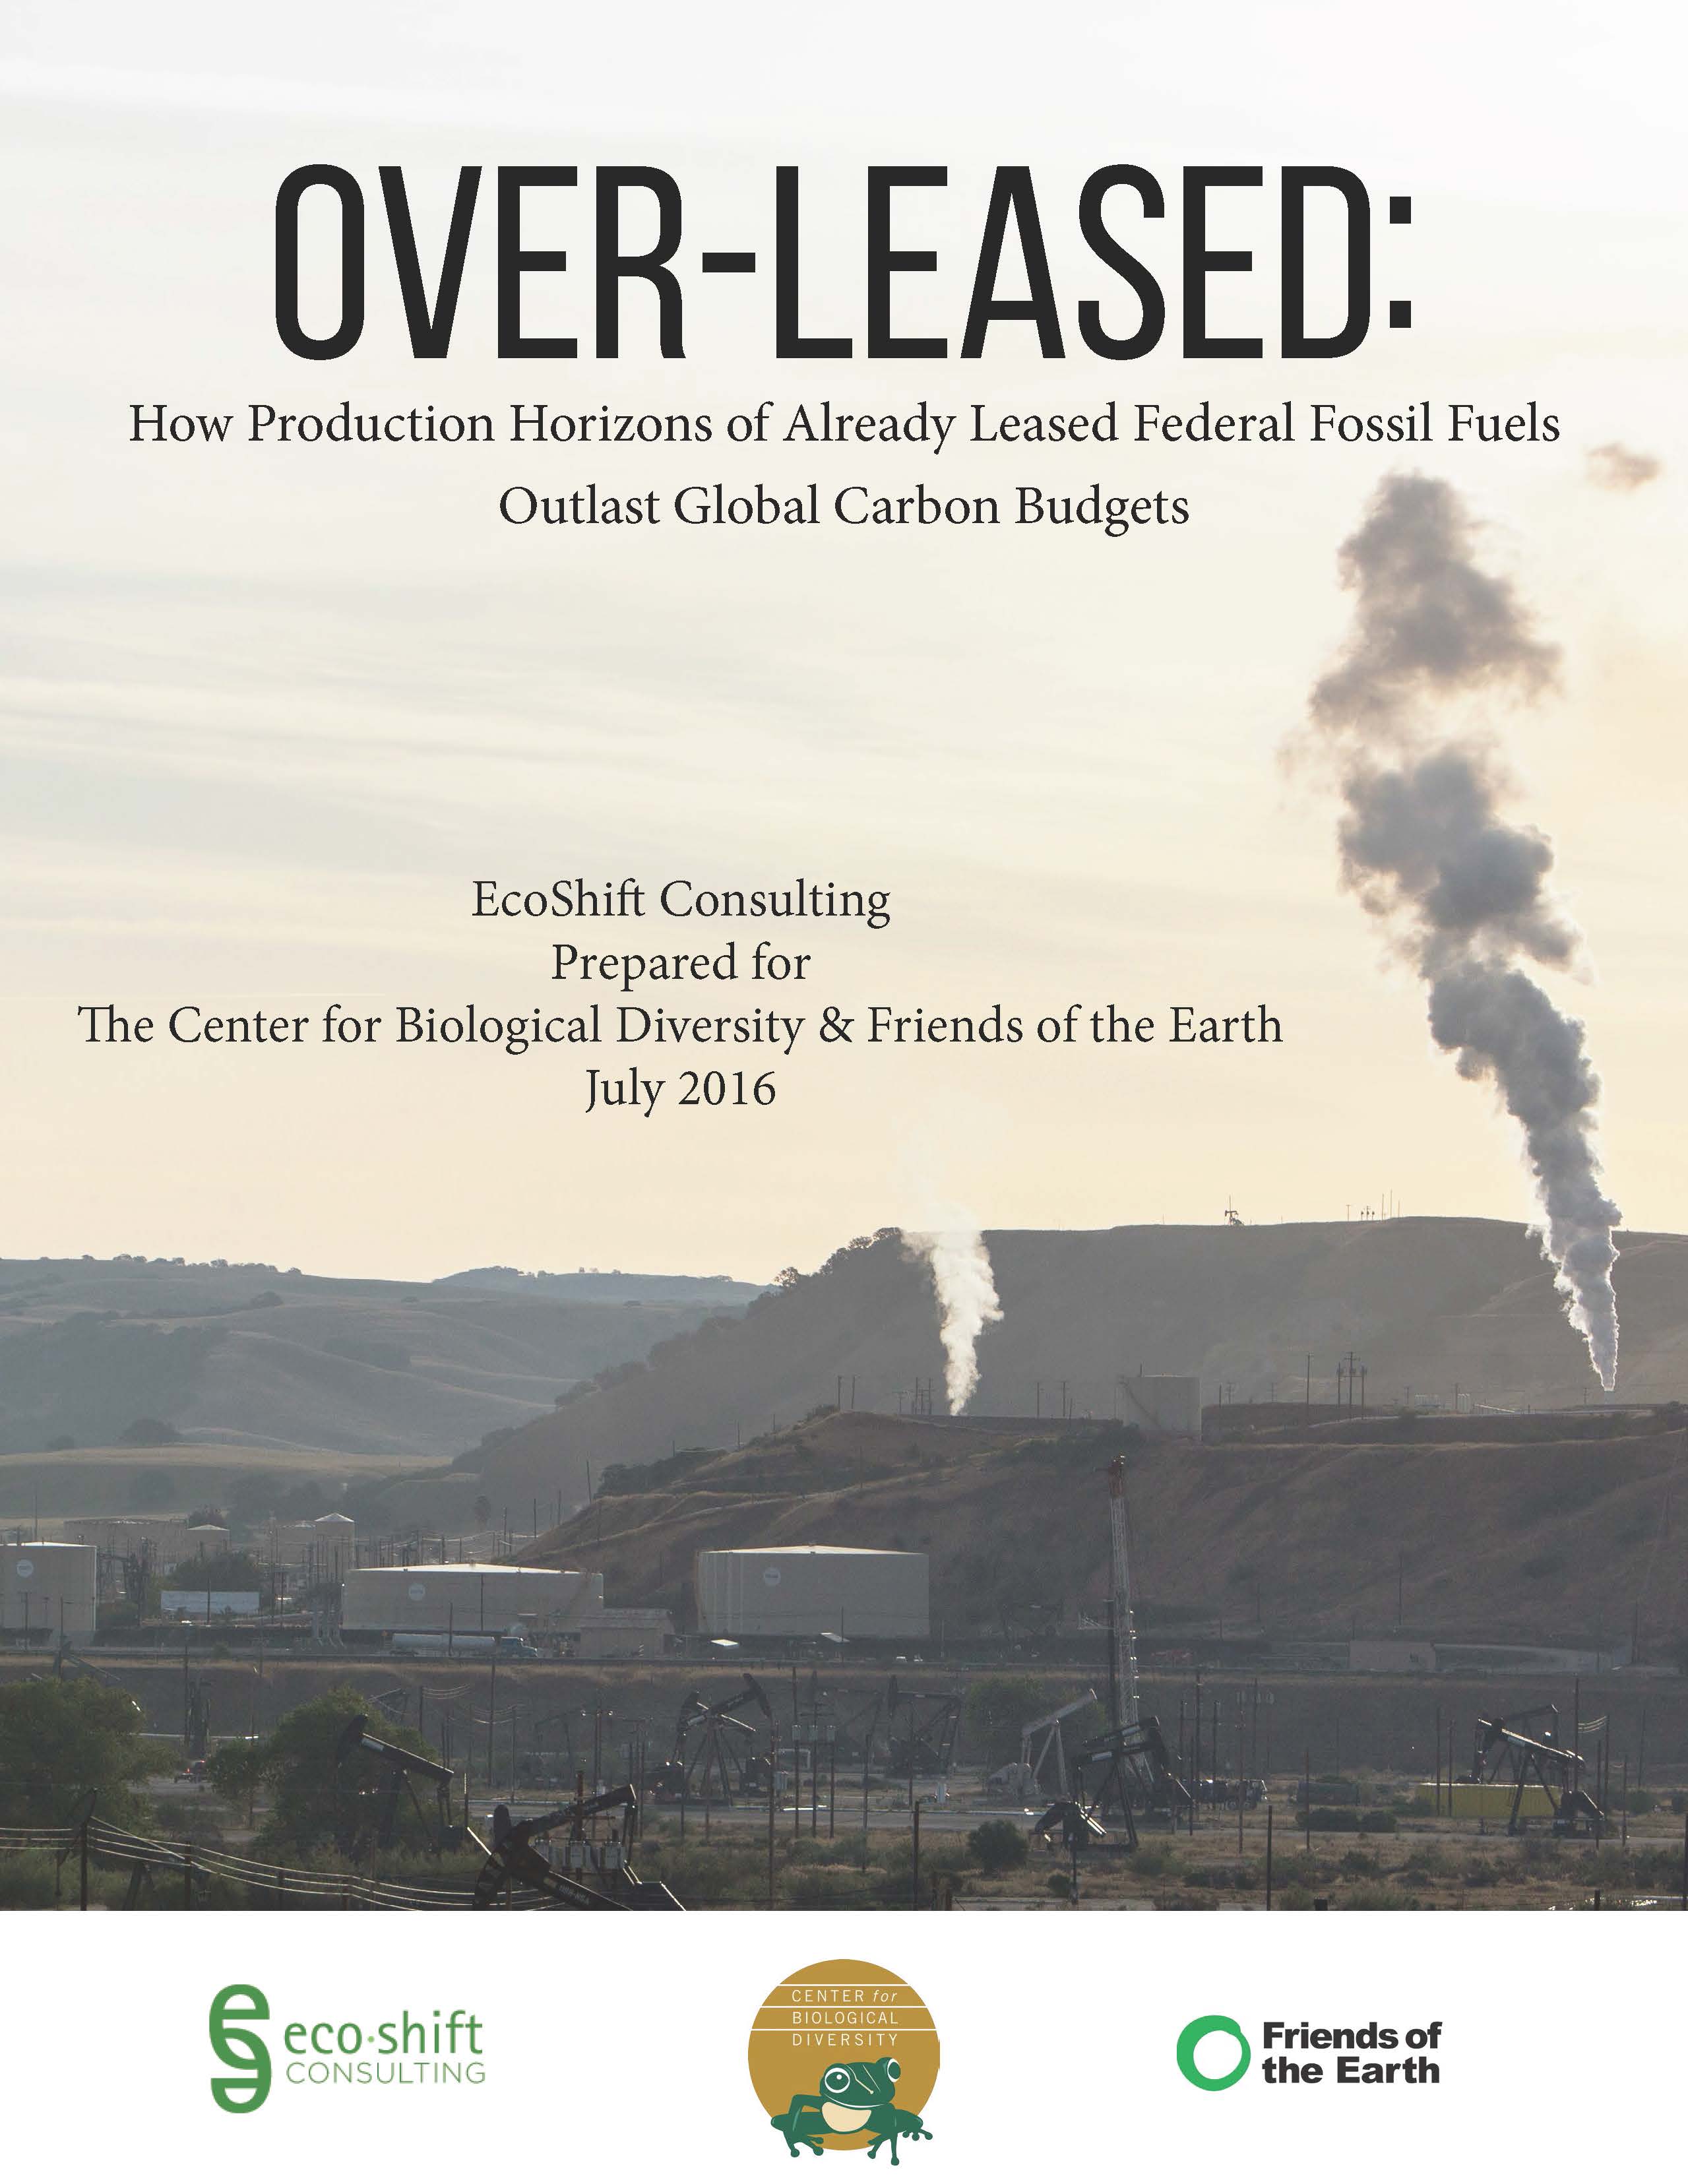 Over-Leased: How Production Horizons of Already Leased Federal Fossil Fuels Outlast Global Carbon Budgets